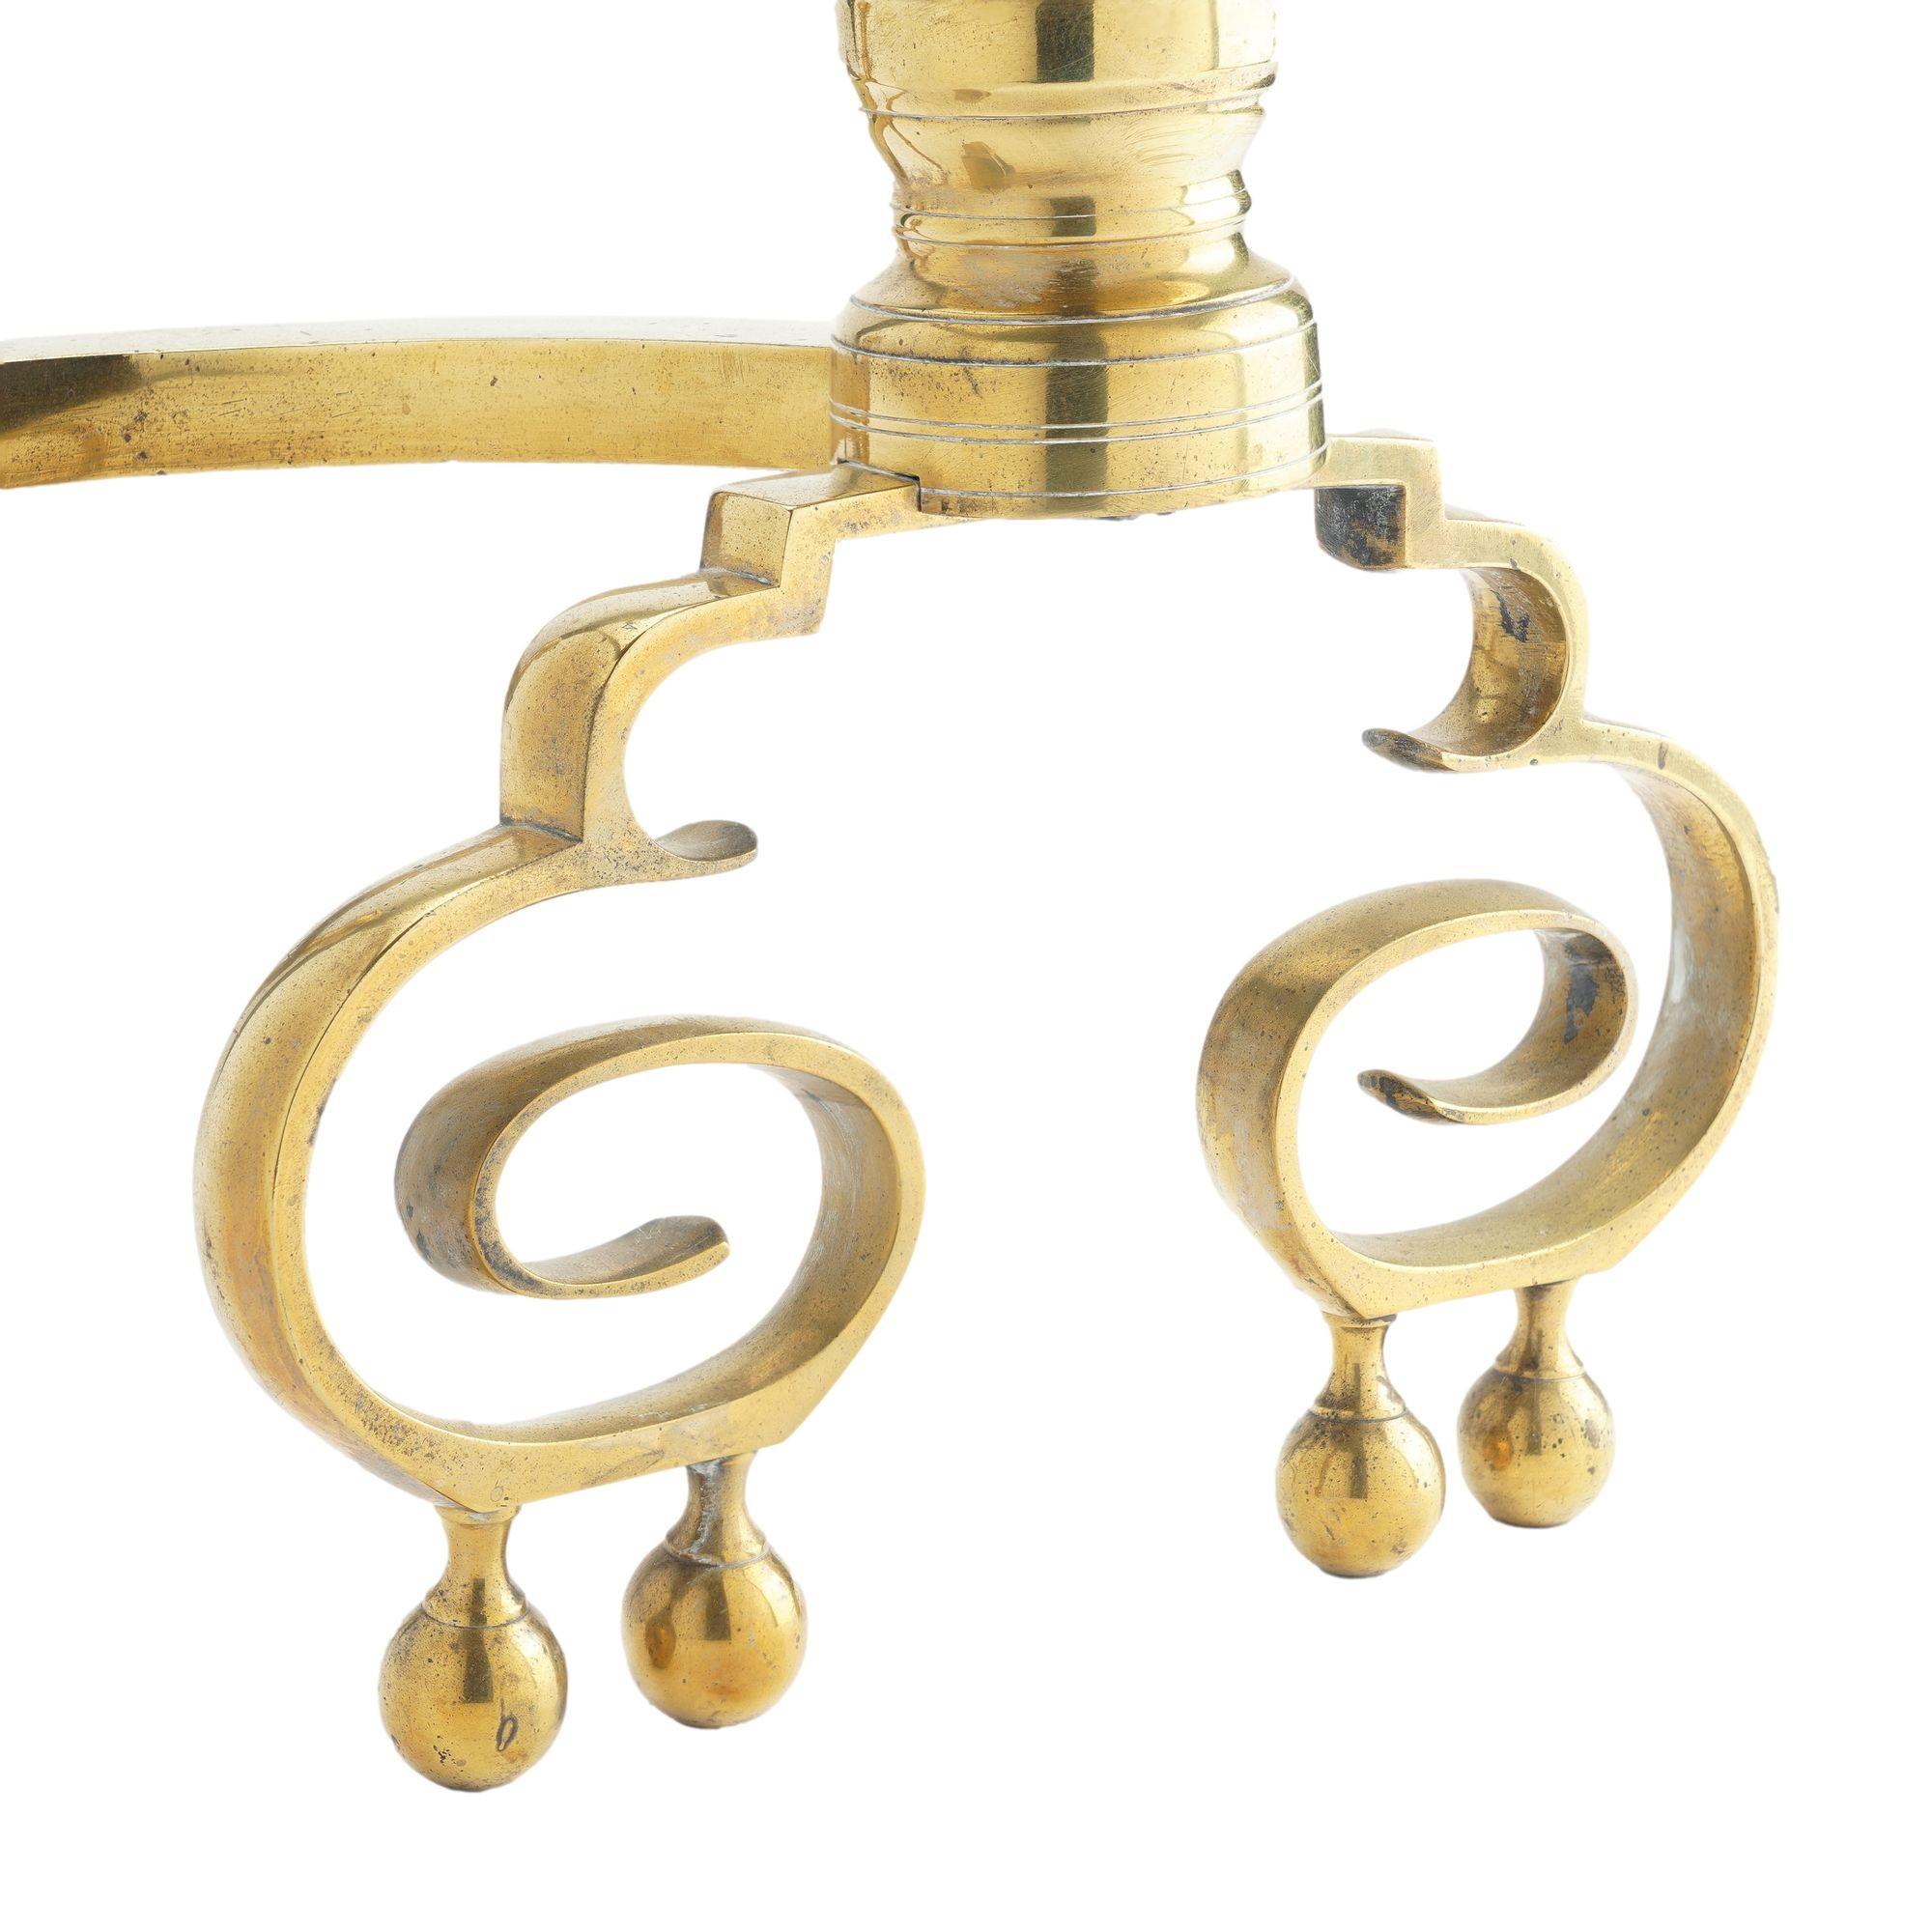 Pair of Philadelphia Neoclassic brass andirons with fire tools, c. 1815-25 1